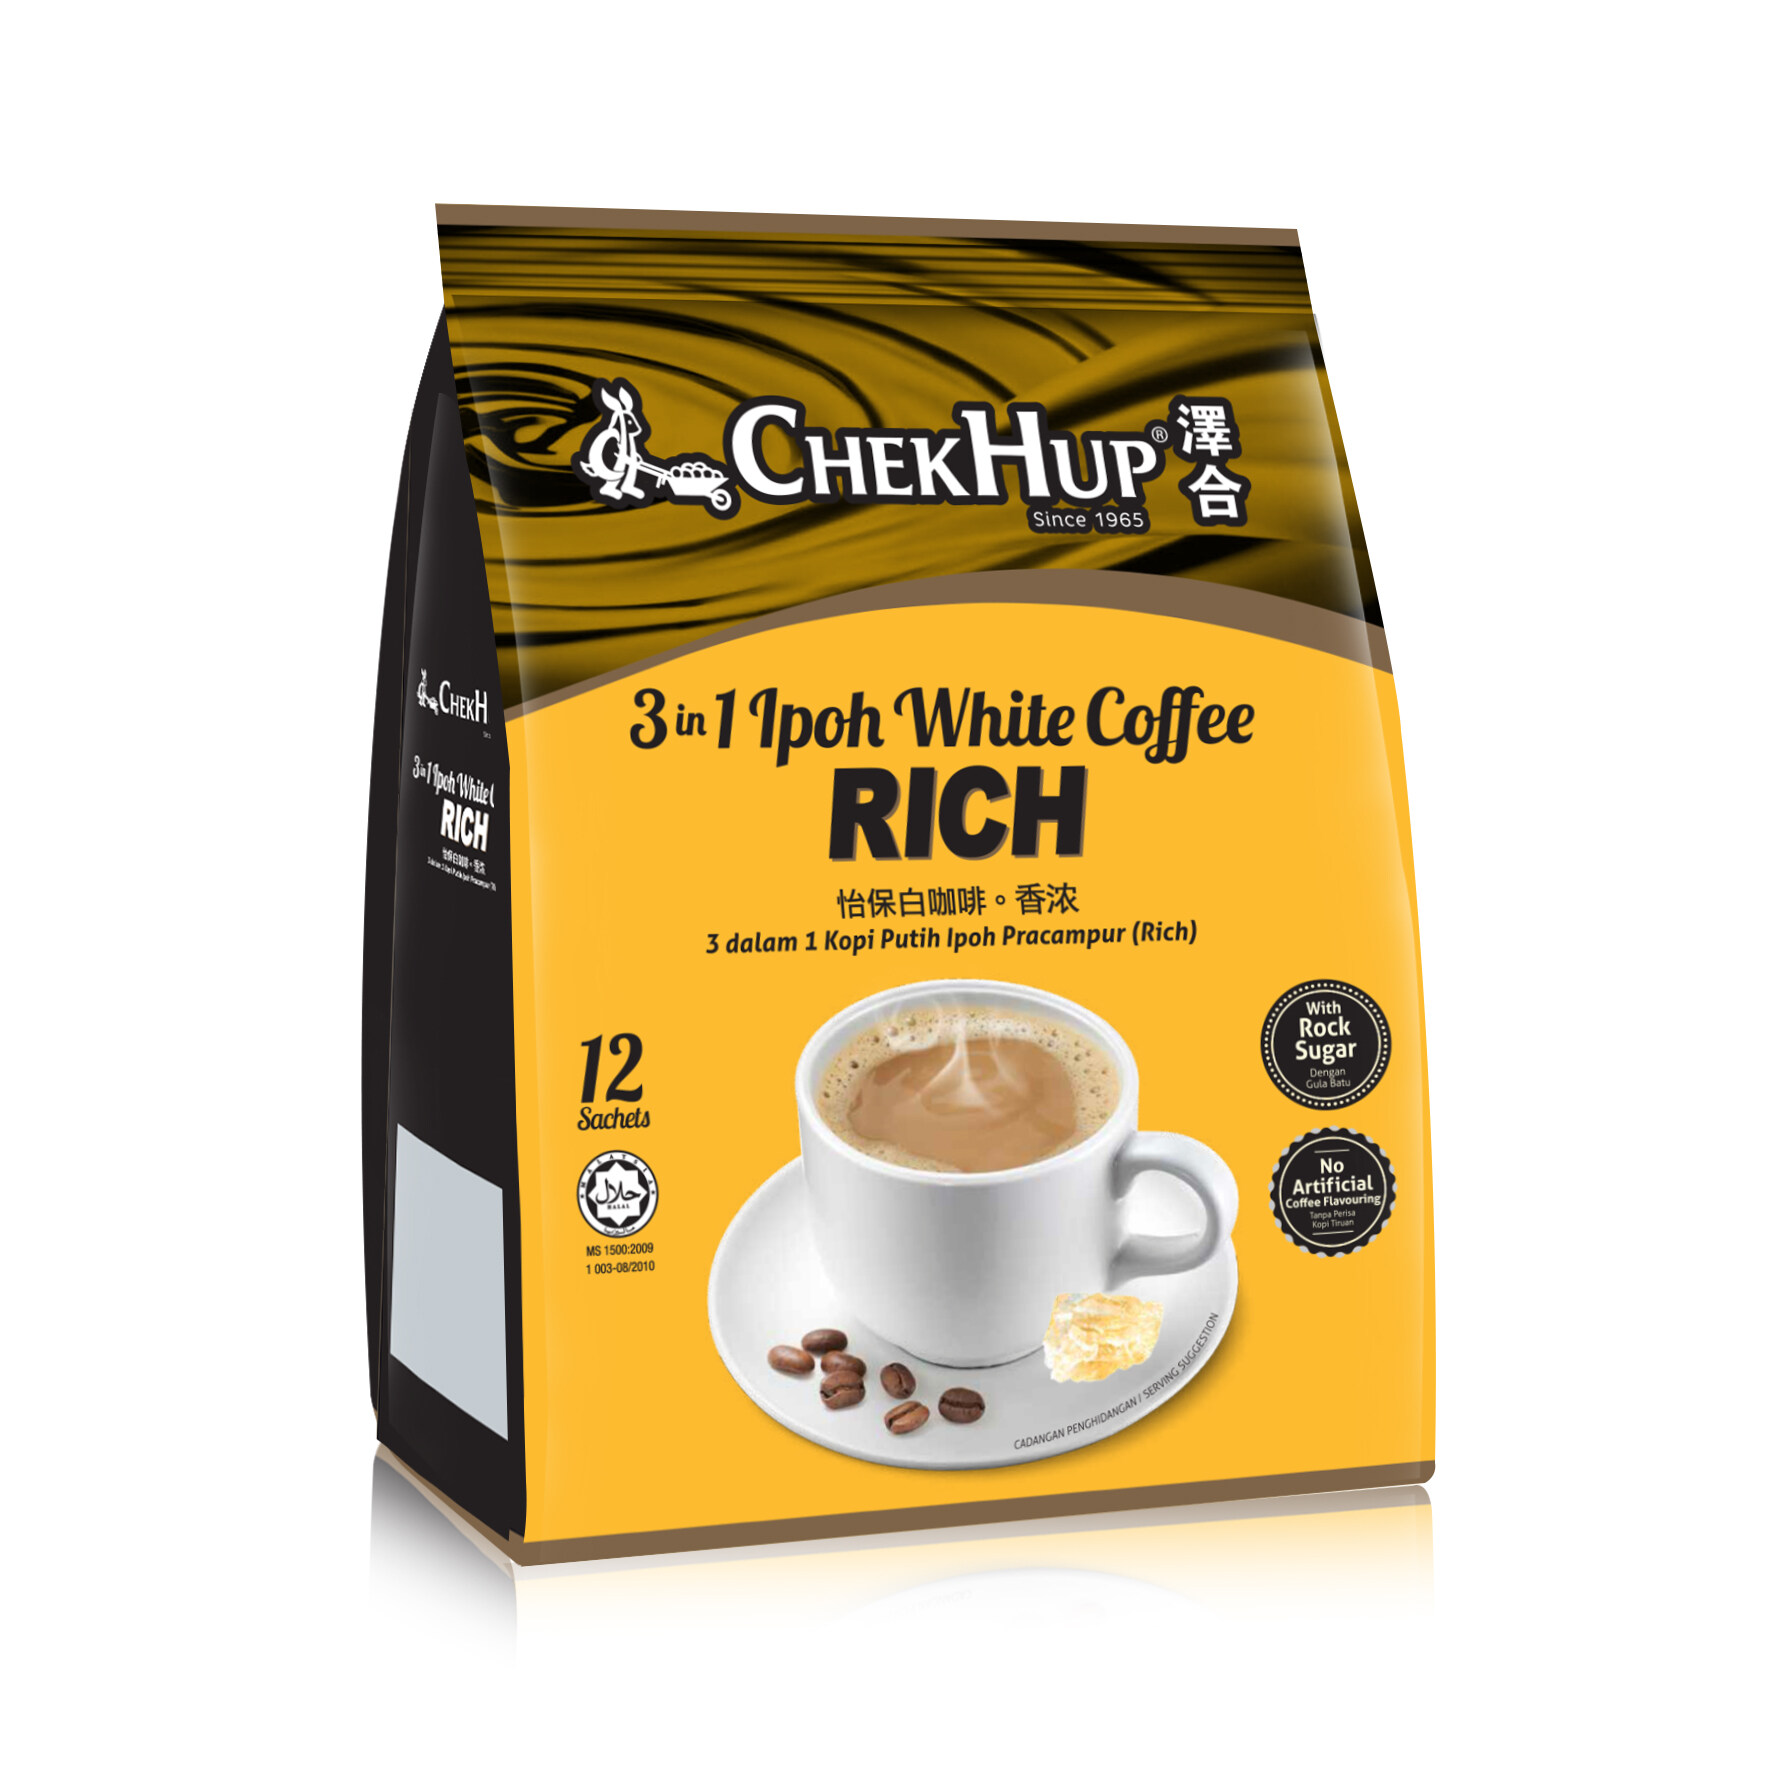 Chek Hup 3 in 1 Ipoh White Coffee Rich - 40g x 12s [Bundle of 2]